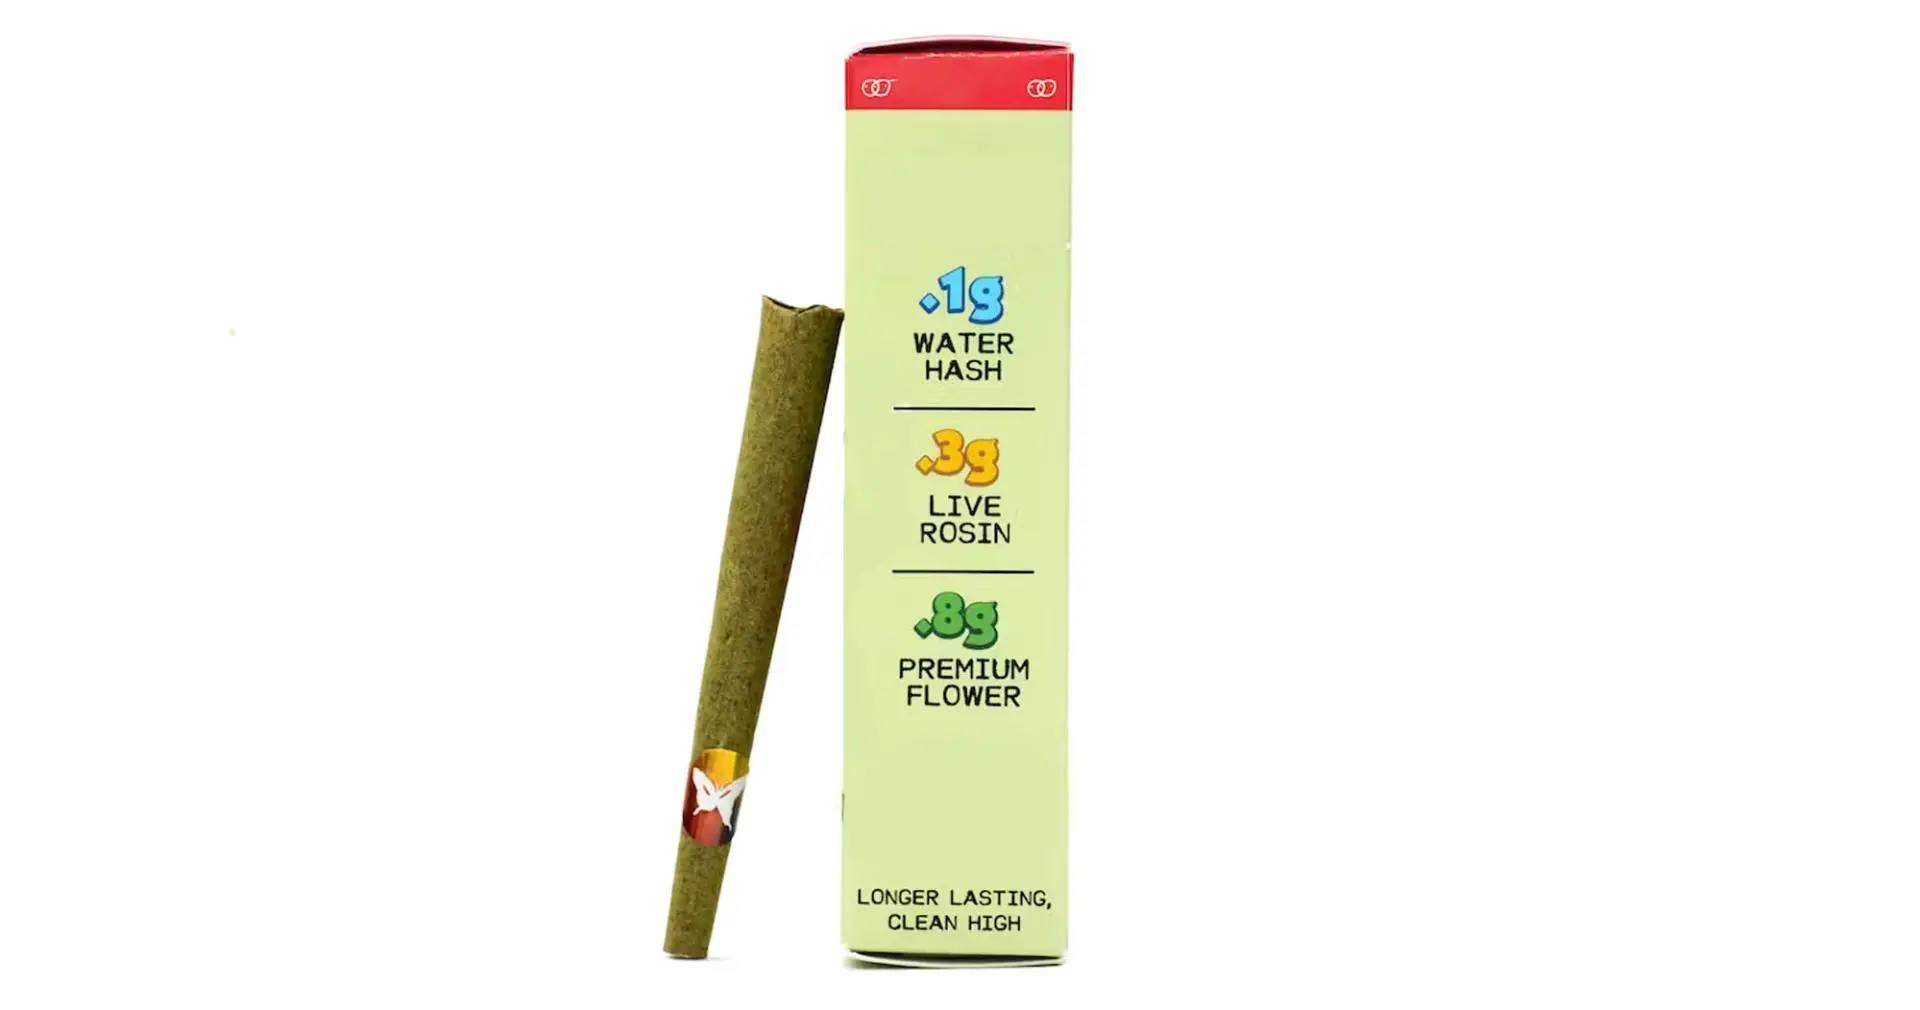 Blue Crack Trifecta Hash Infused Pre-Roll